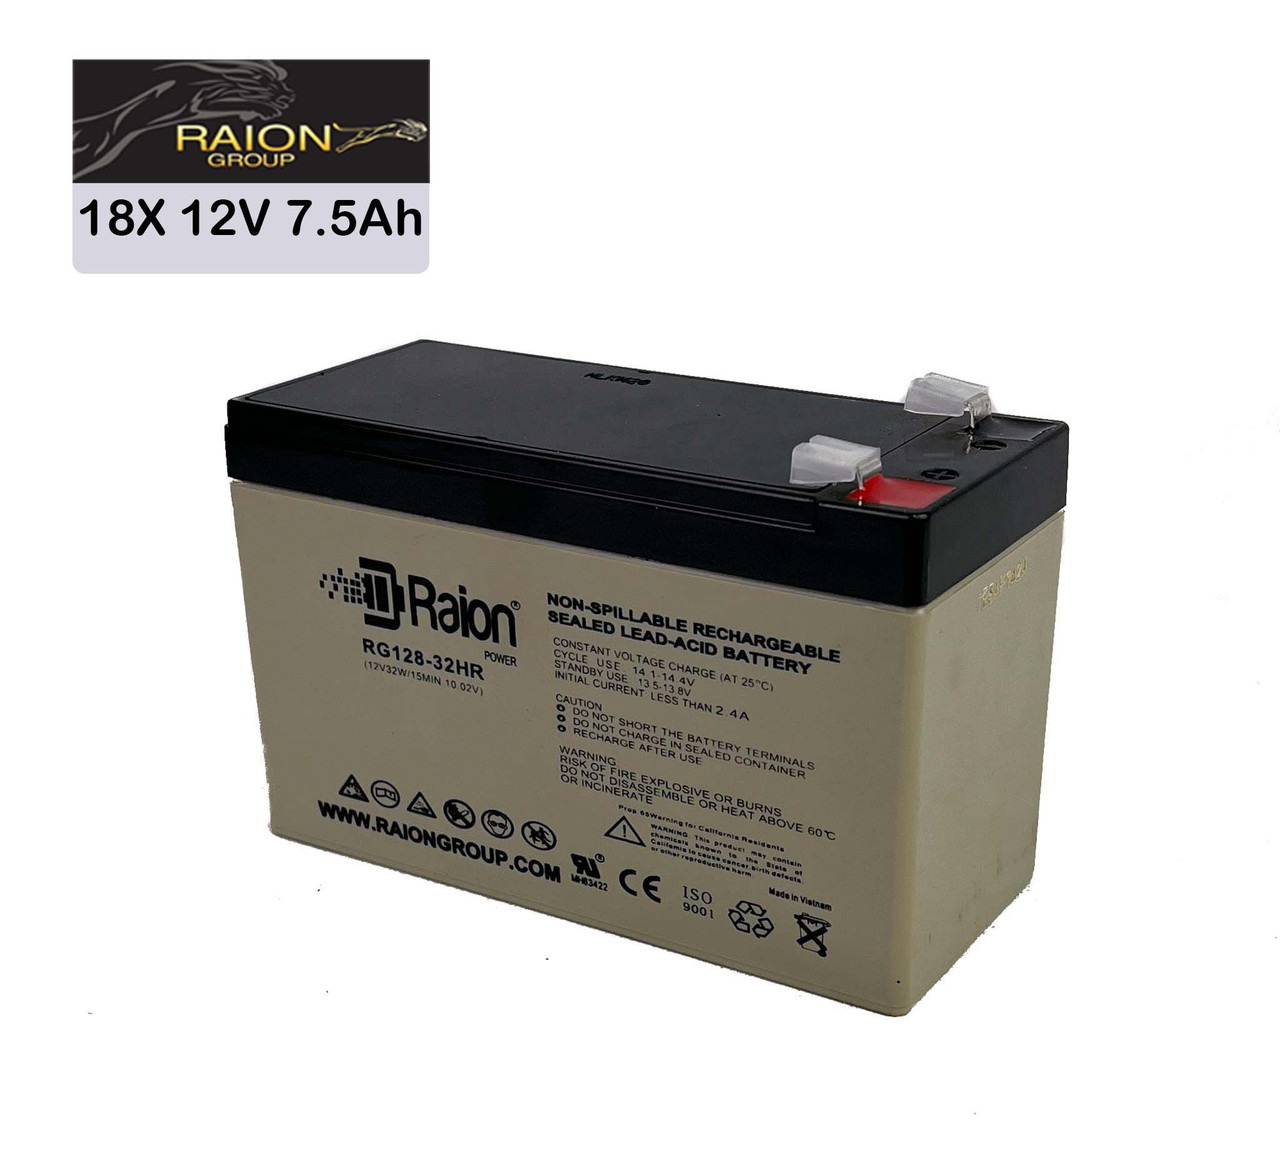 Raion Power 12V 7.5Ah High Rate Discharge UPS Batteries for Dell 5600W / 8000VA H955N RM 4U - 18 Pack